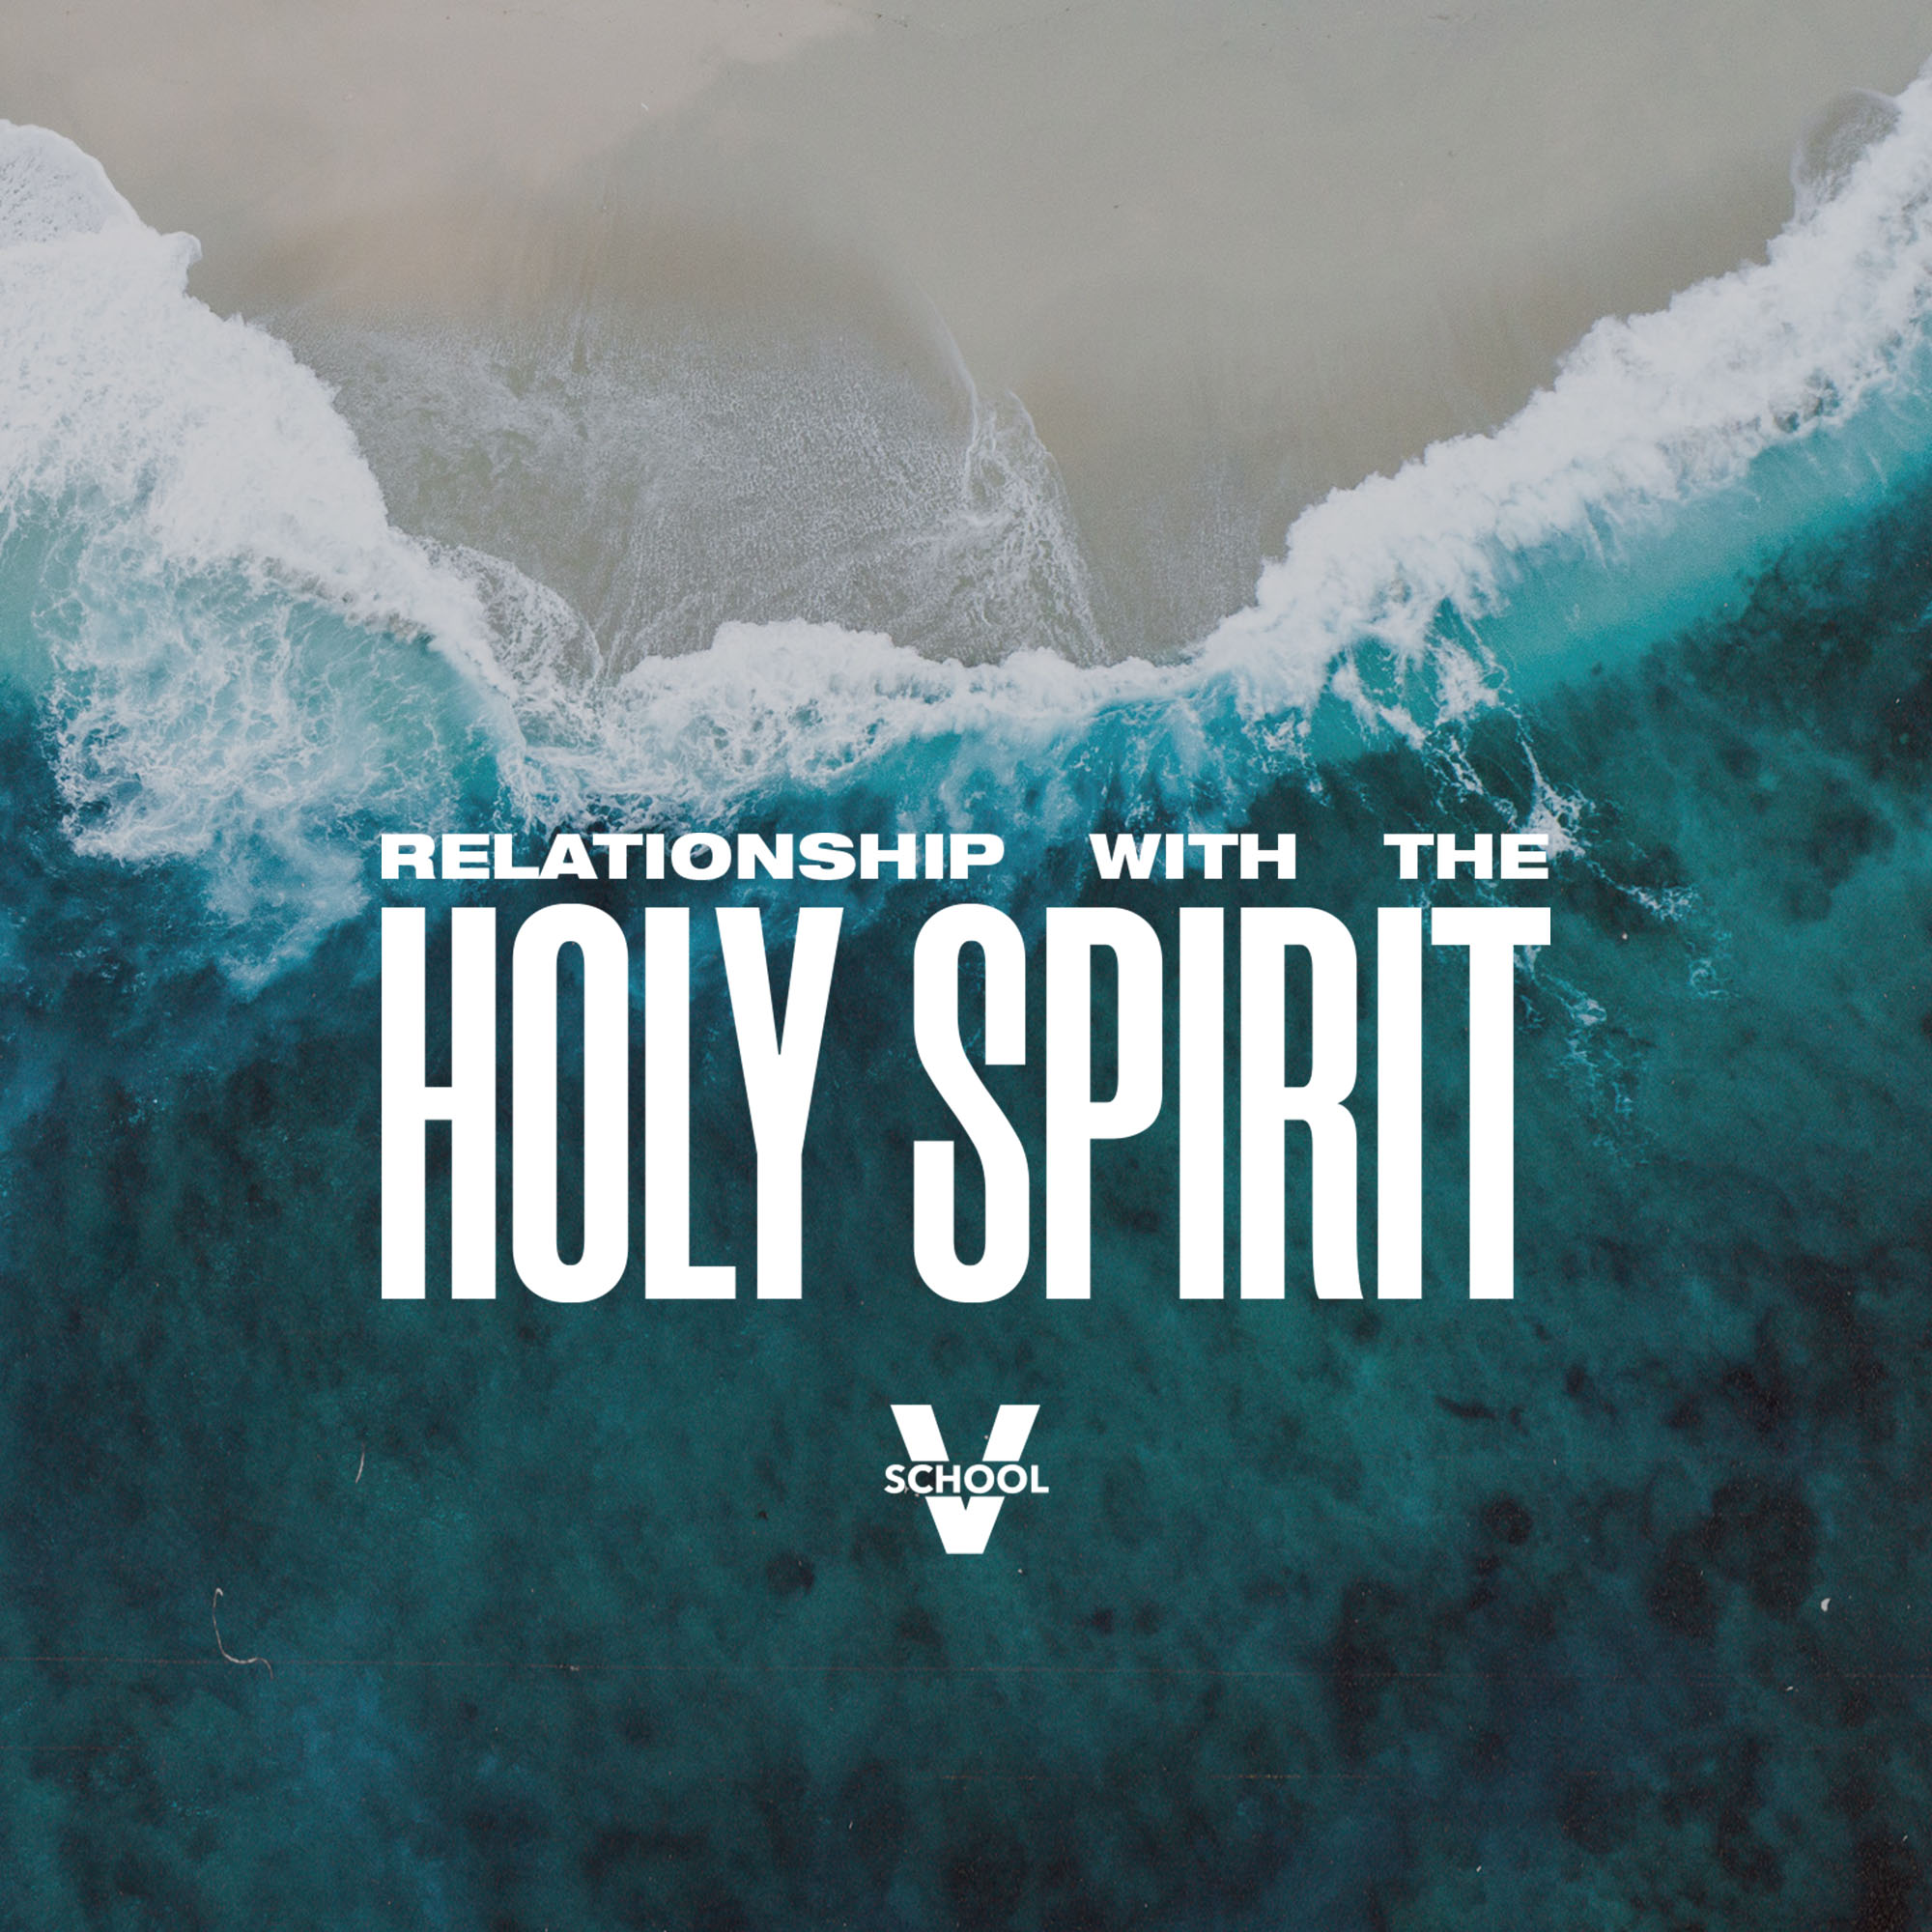 resource - Relationship with the Holy Spirit